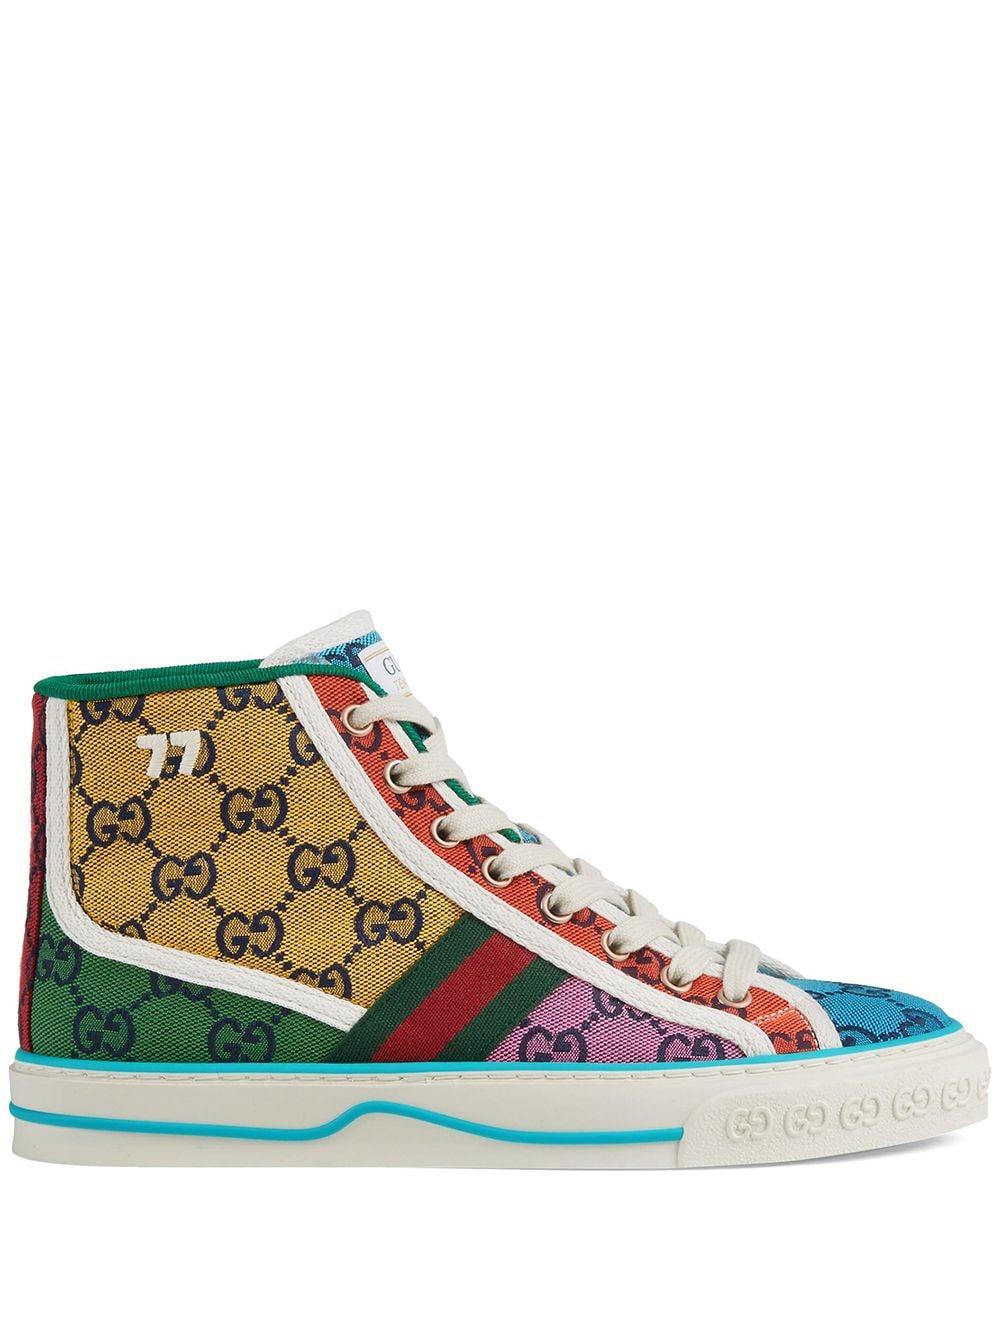 Gucci Tennis 1977 GG Multicolor High-top Sneakers in Yellow